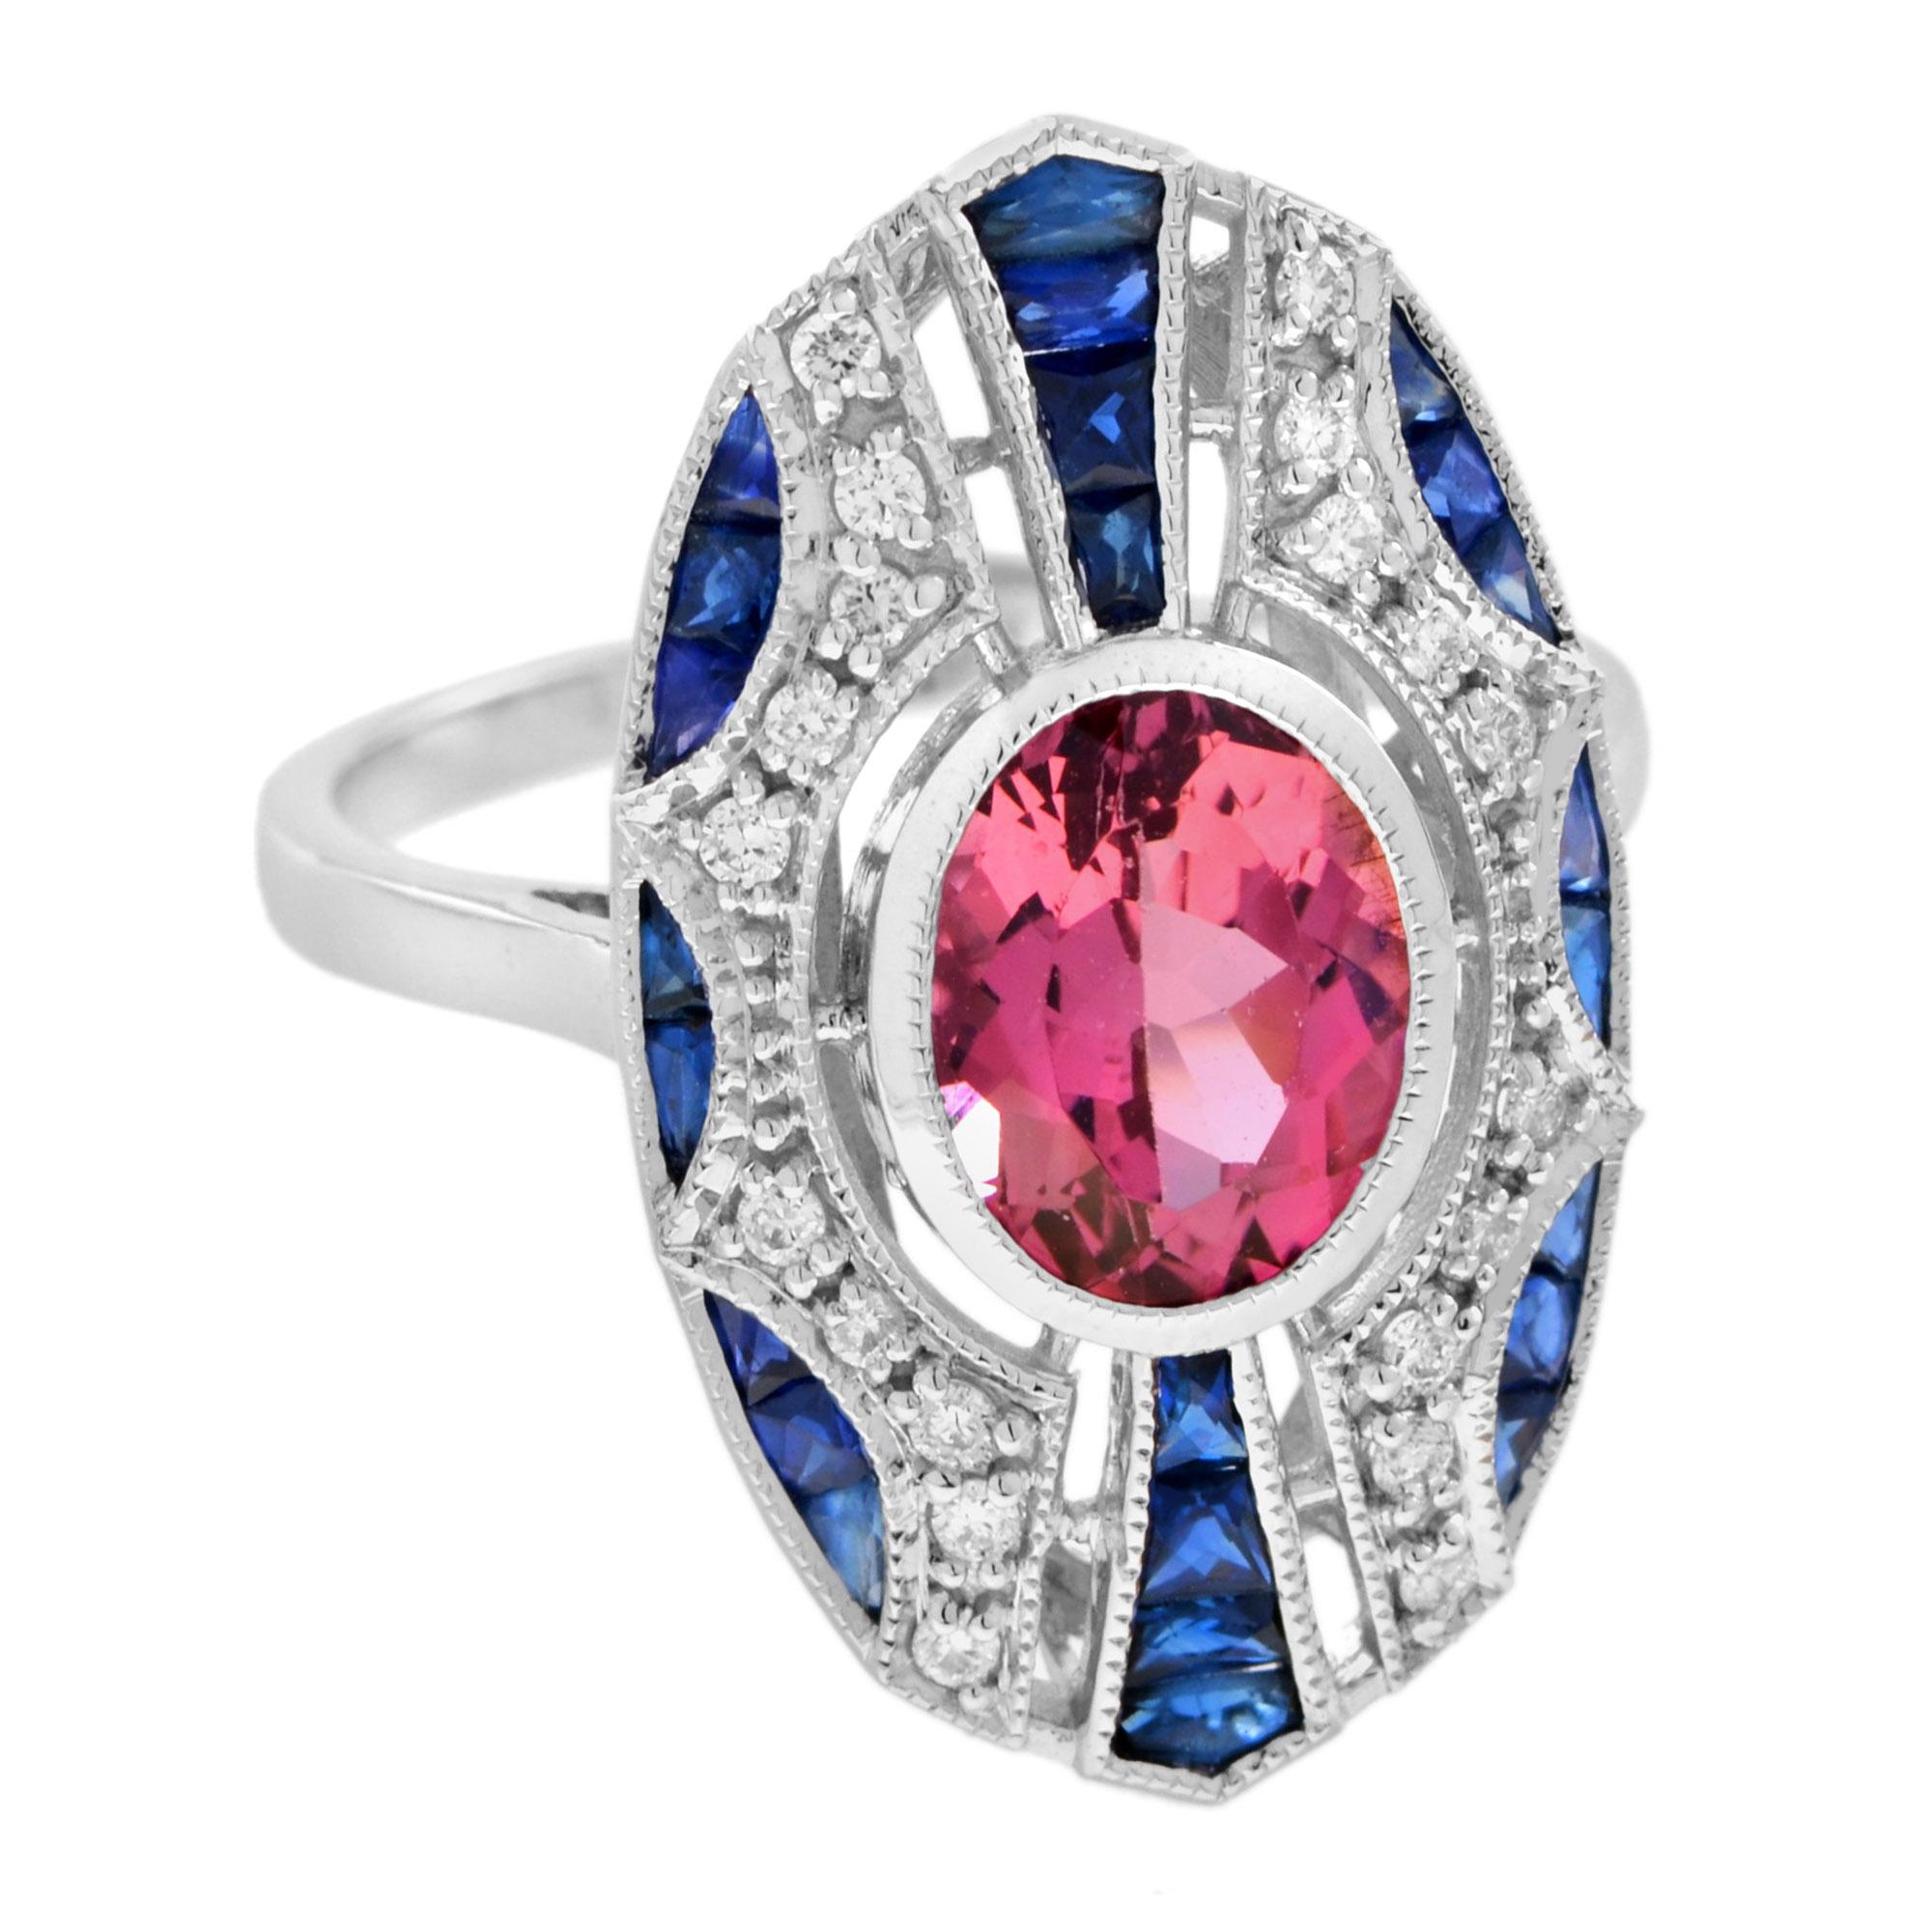 Oval Cut Pink Tourmaline Blue Sapphire Diamond Art Deco Style Dinner Ring in White Gold For Sale